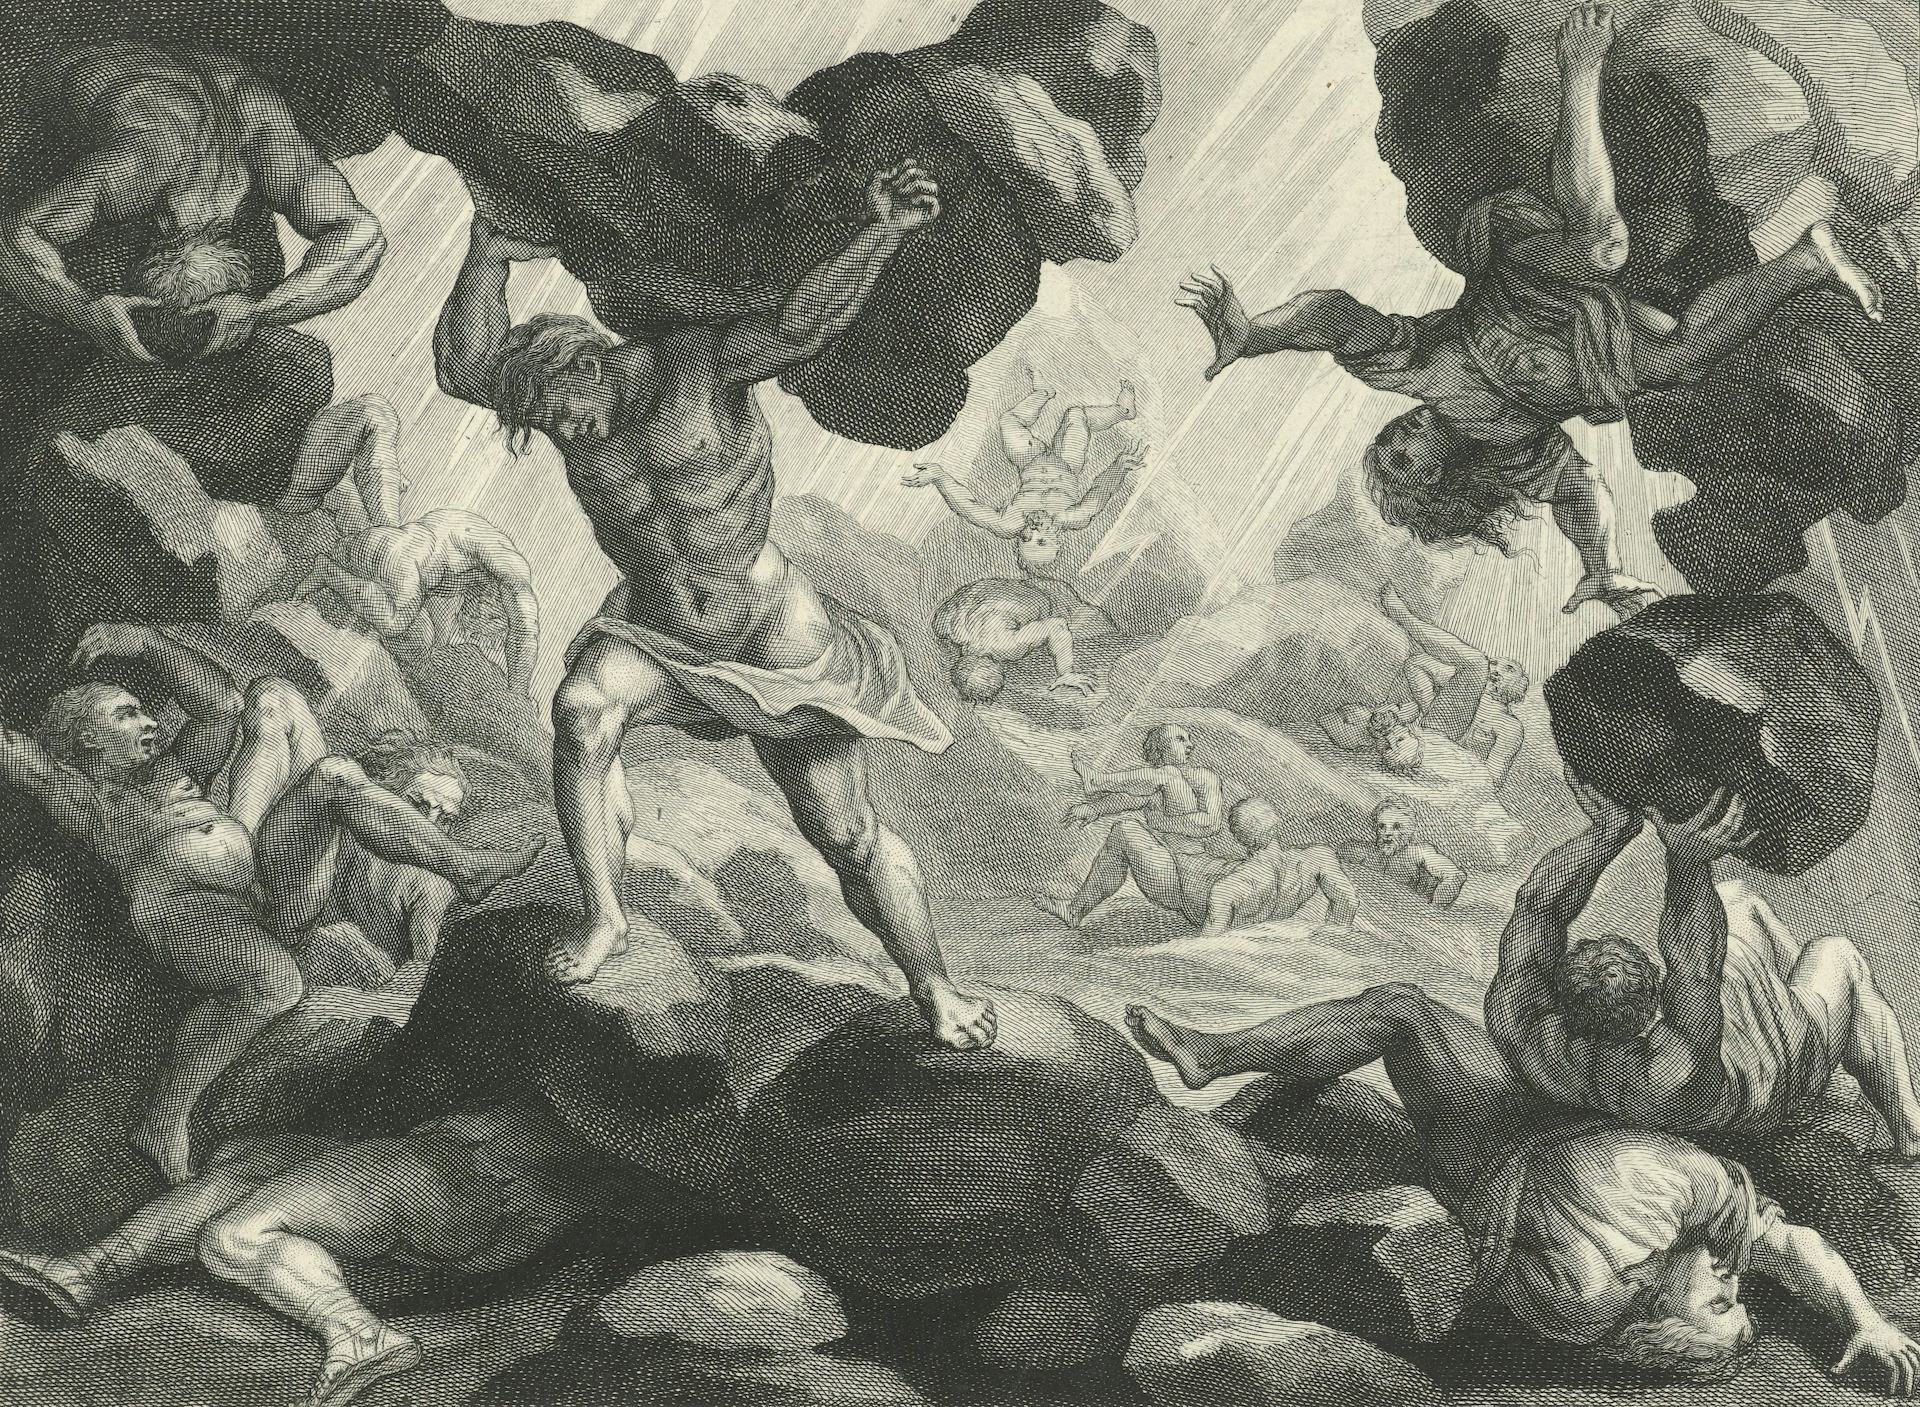 Defeat of the Titans by Philip van Gunst, after Giulio Romano (ca. 1685 - 1732)